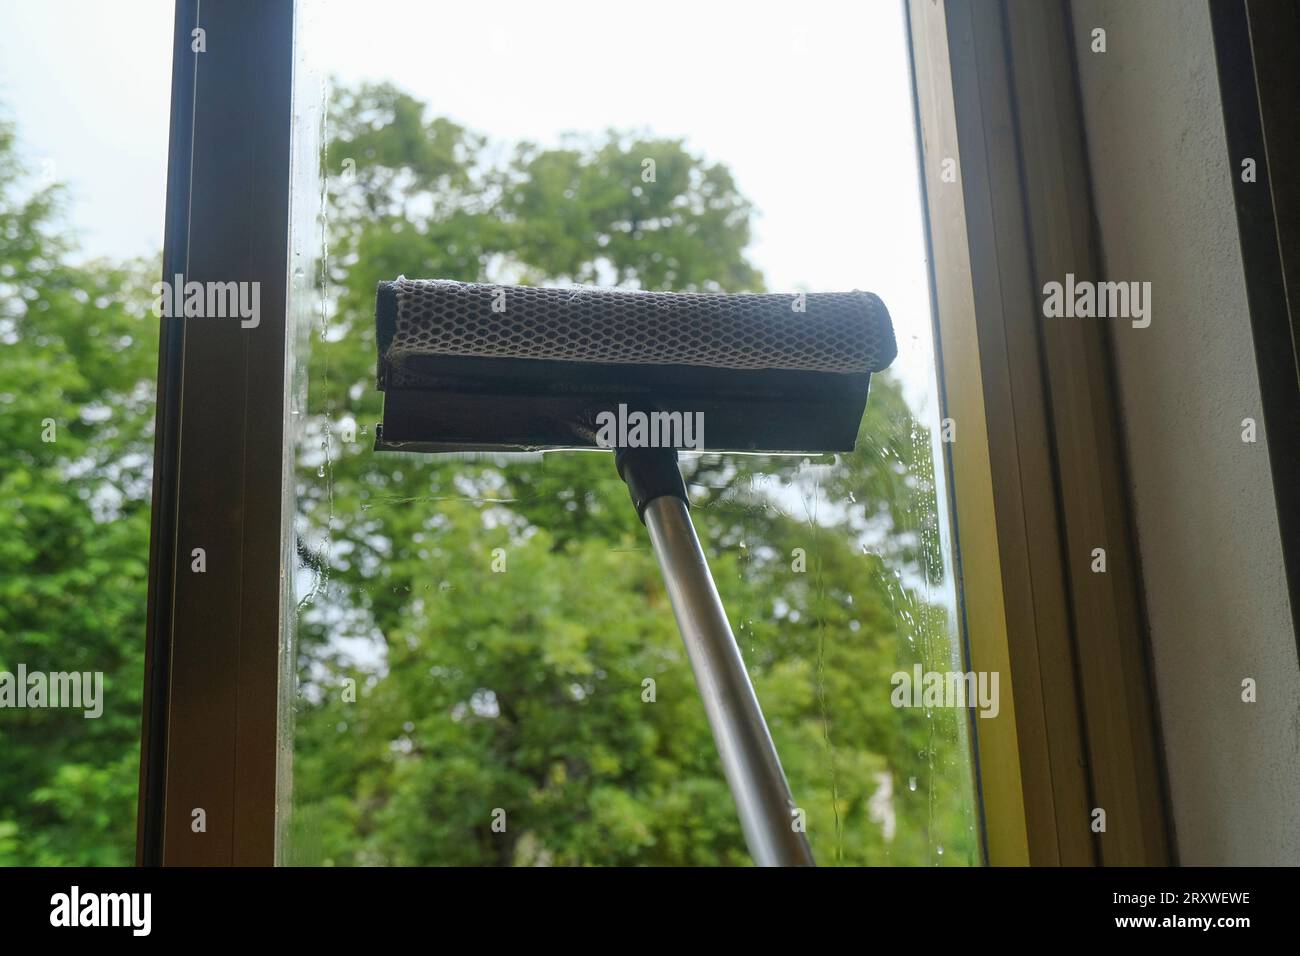 cleaning the window with a window cleaning mop closeup. Cleaning services Stock Photo